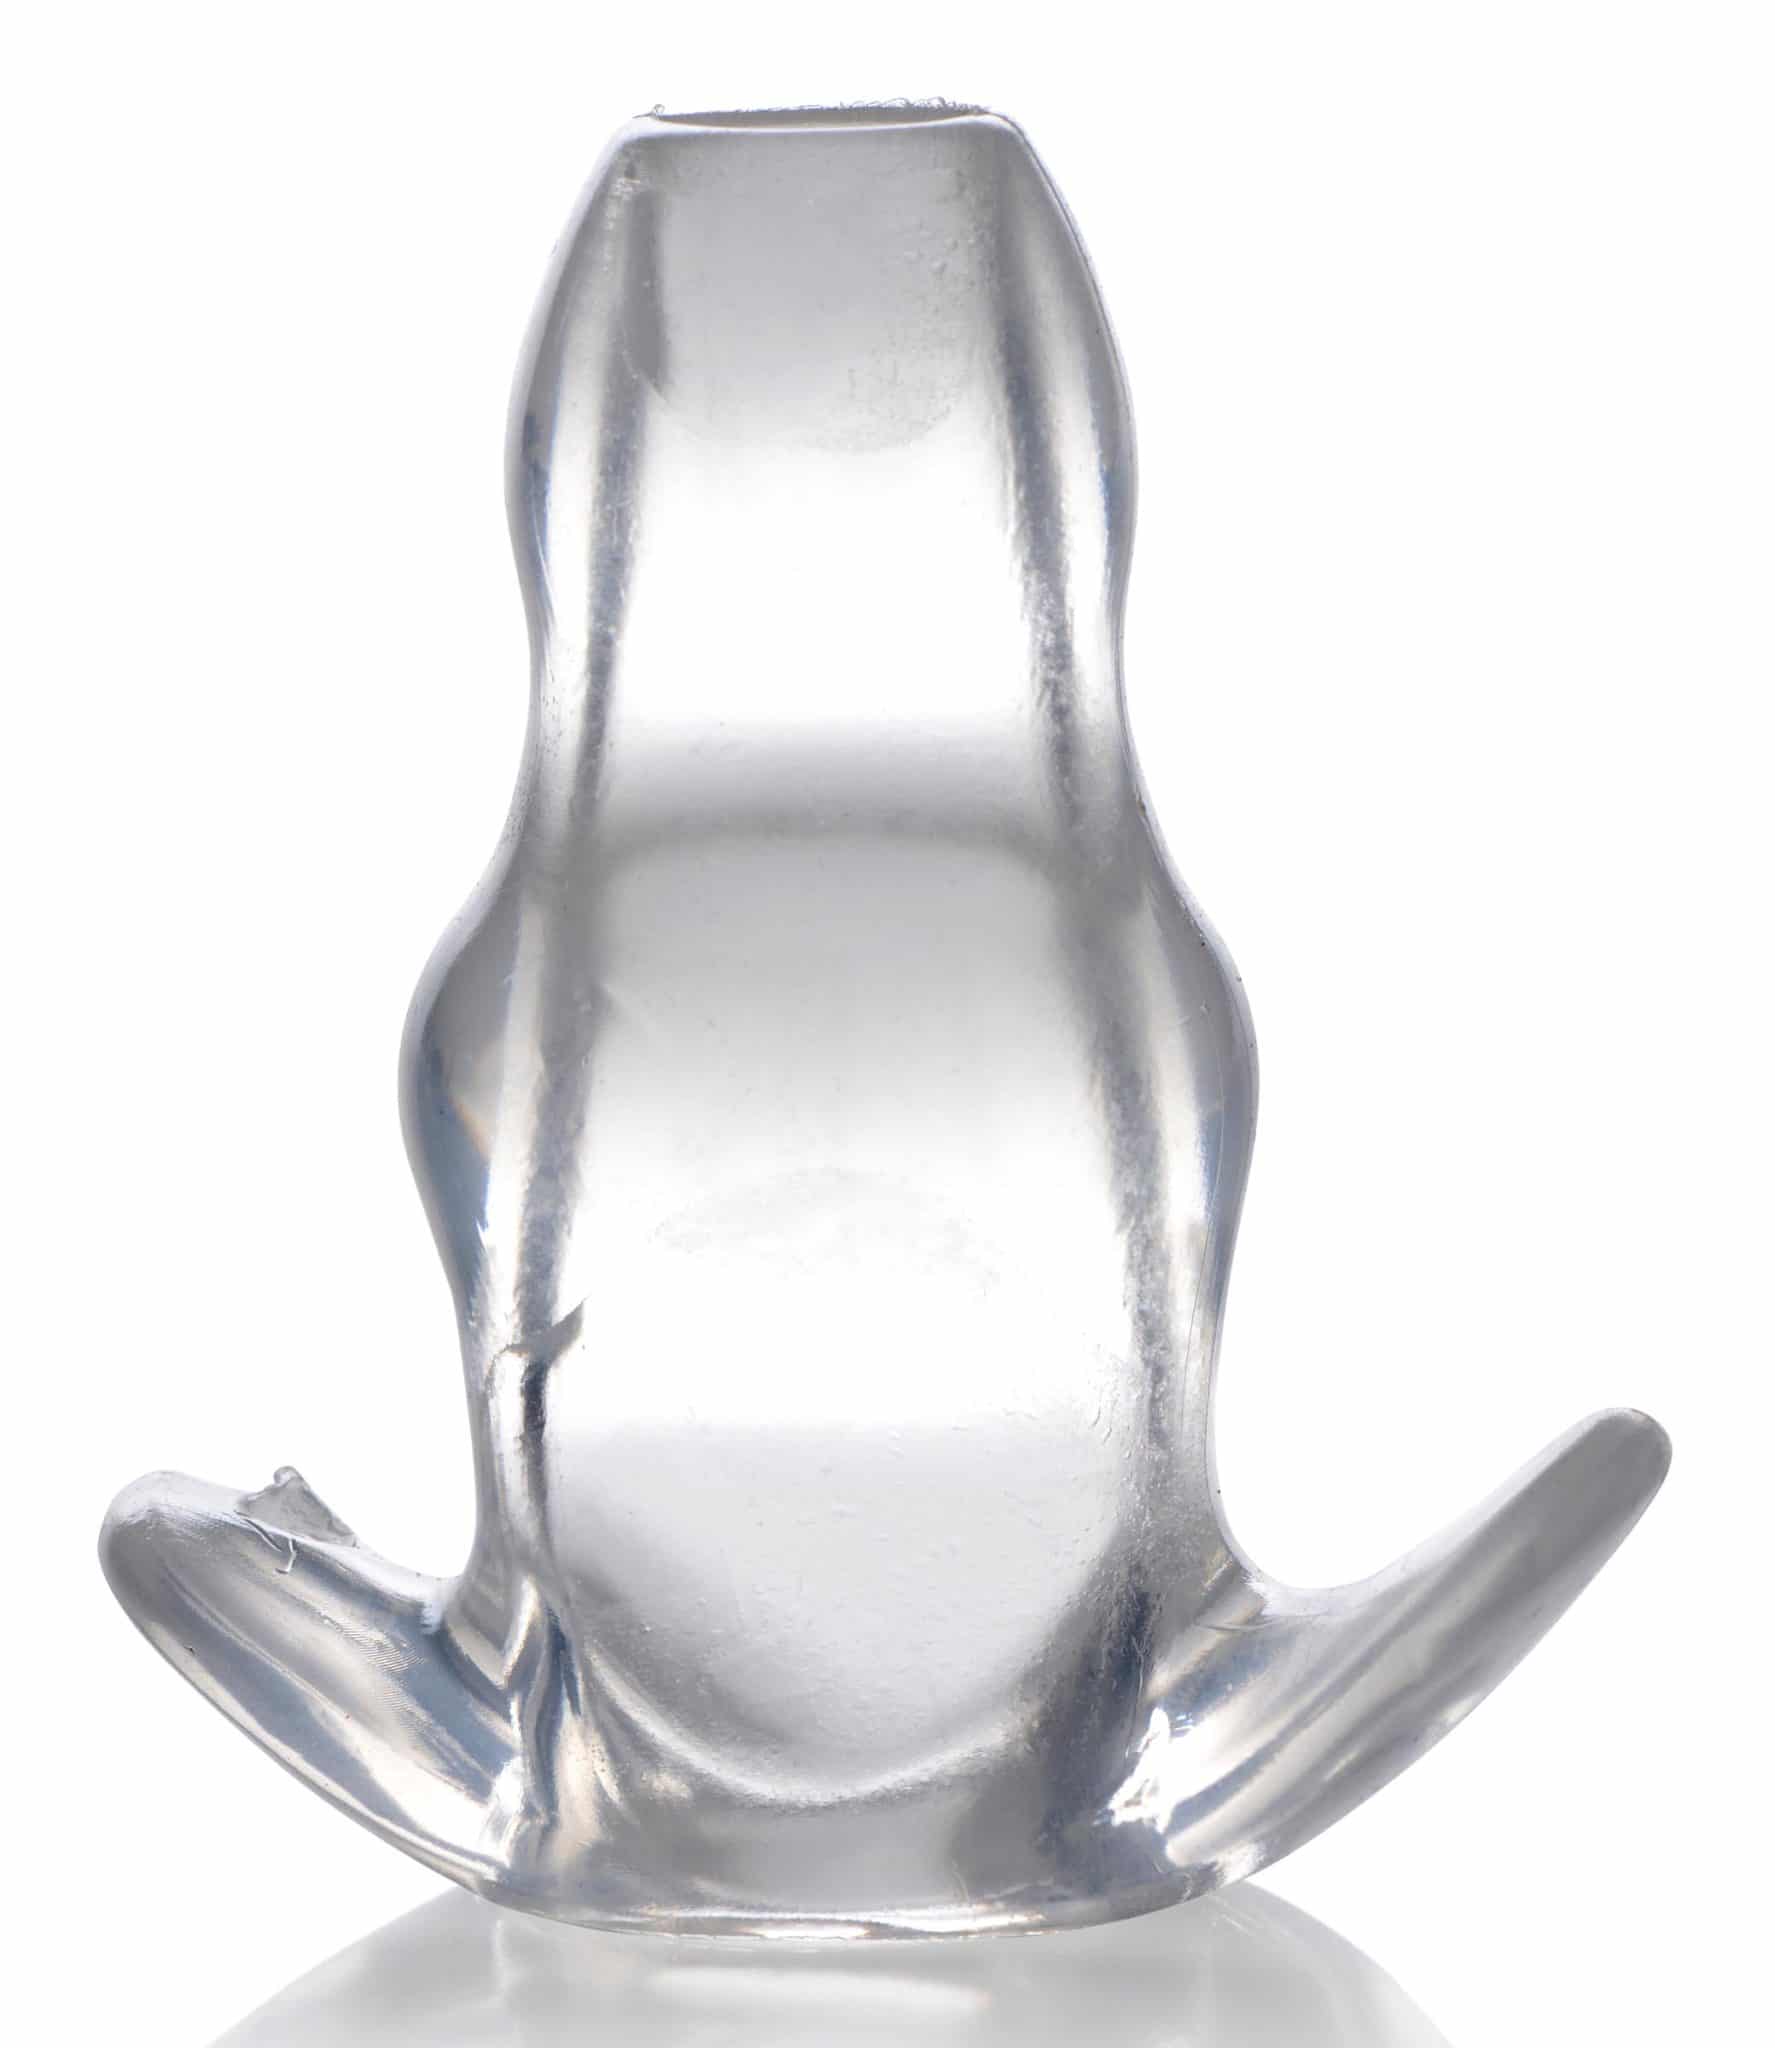 Clear View Hollow Anal Plug – Small